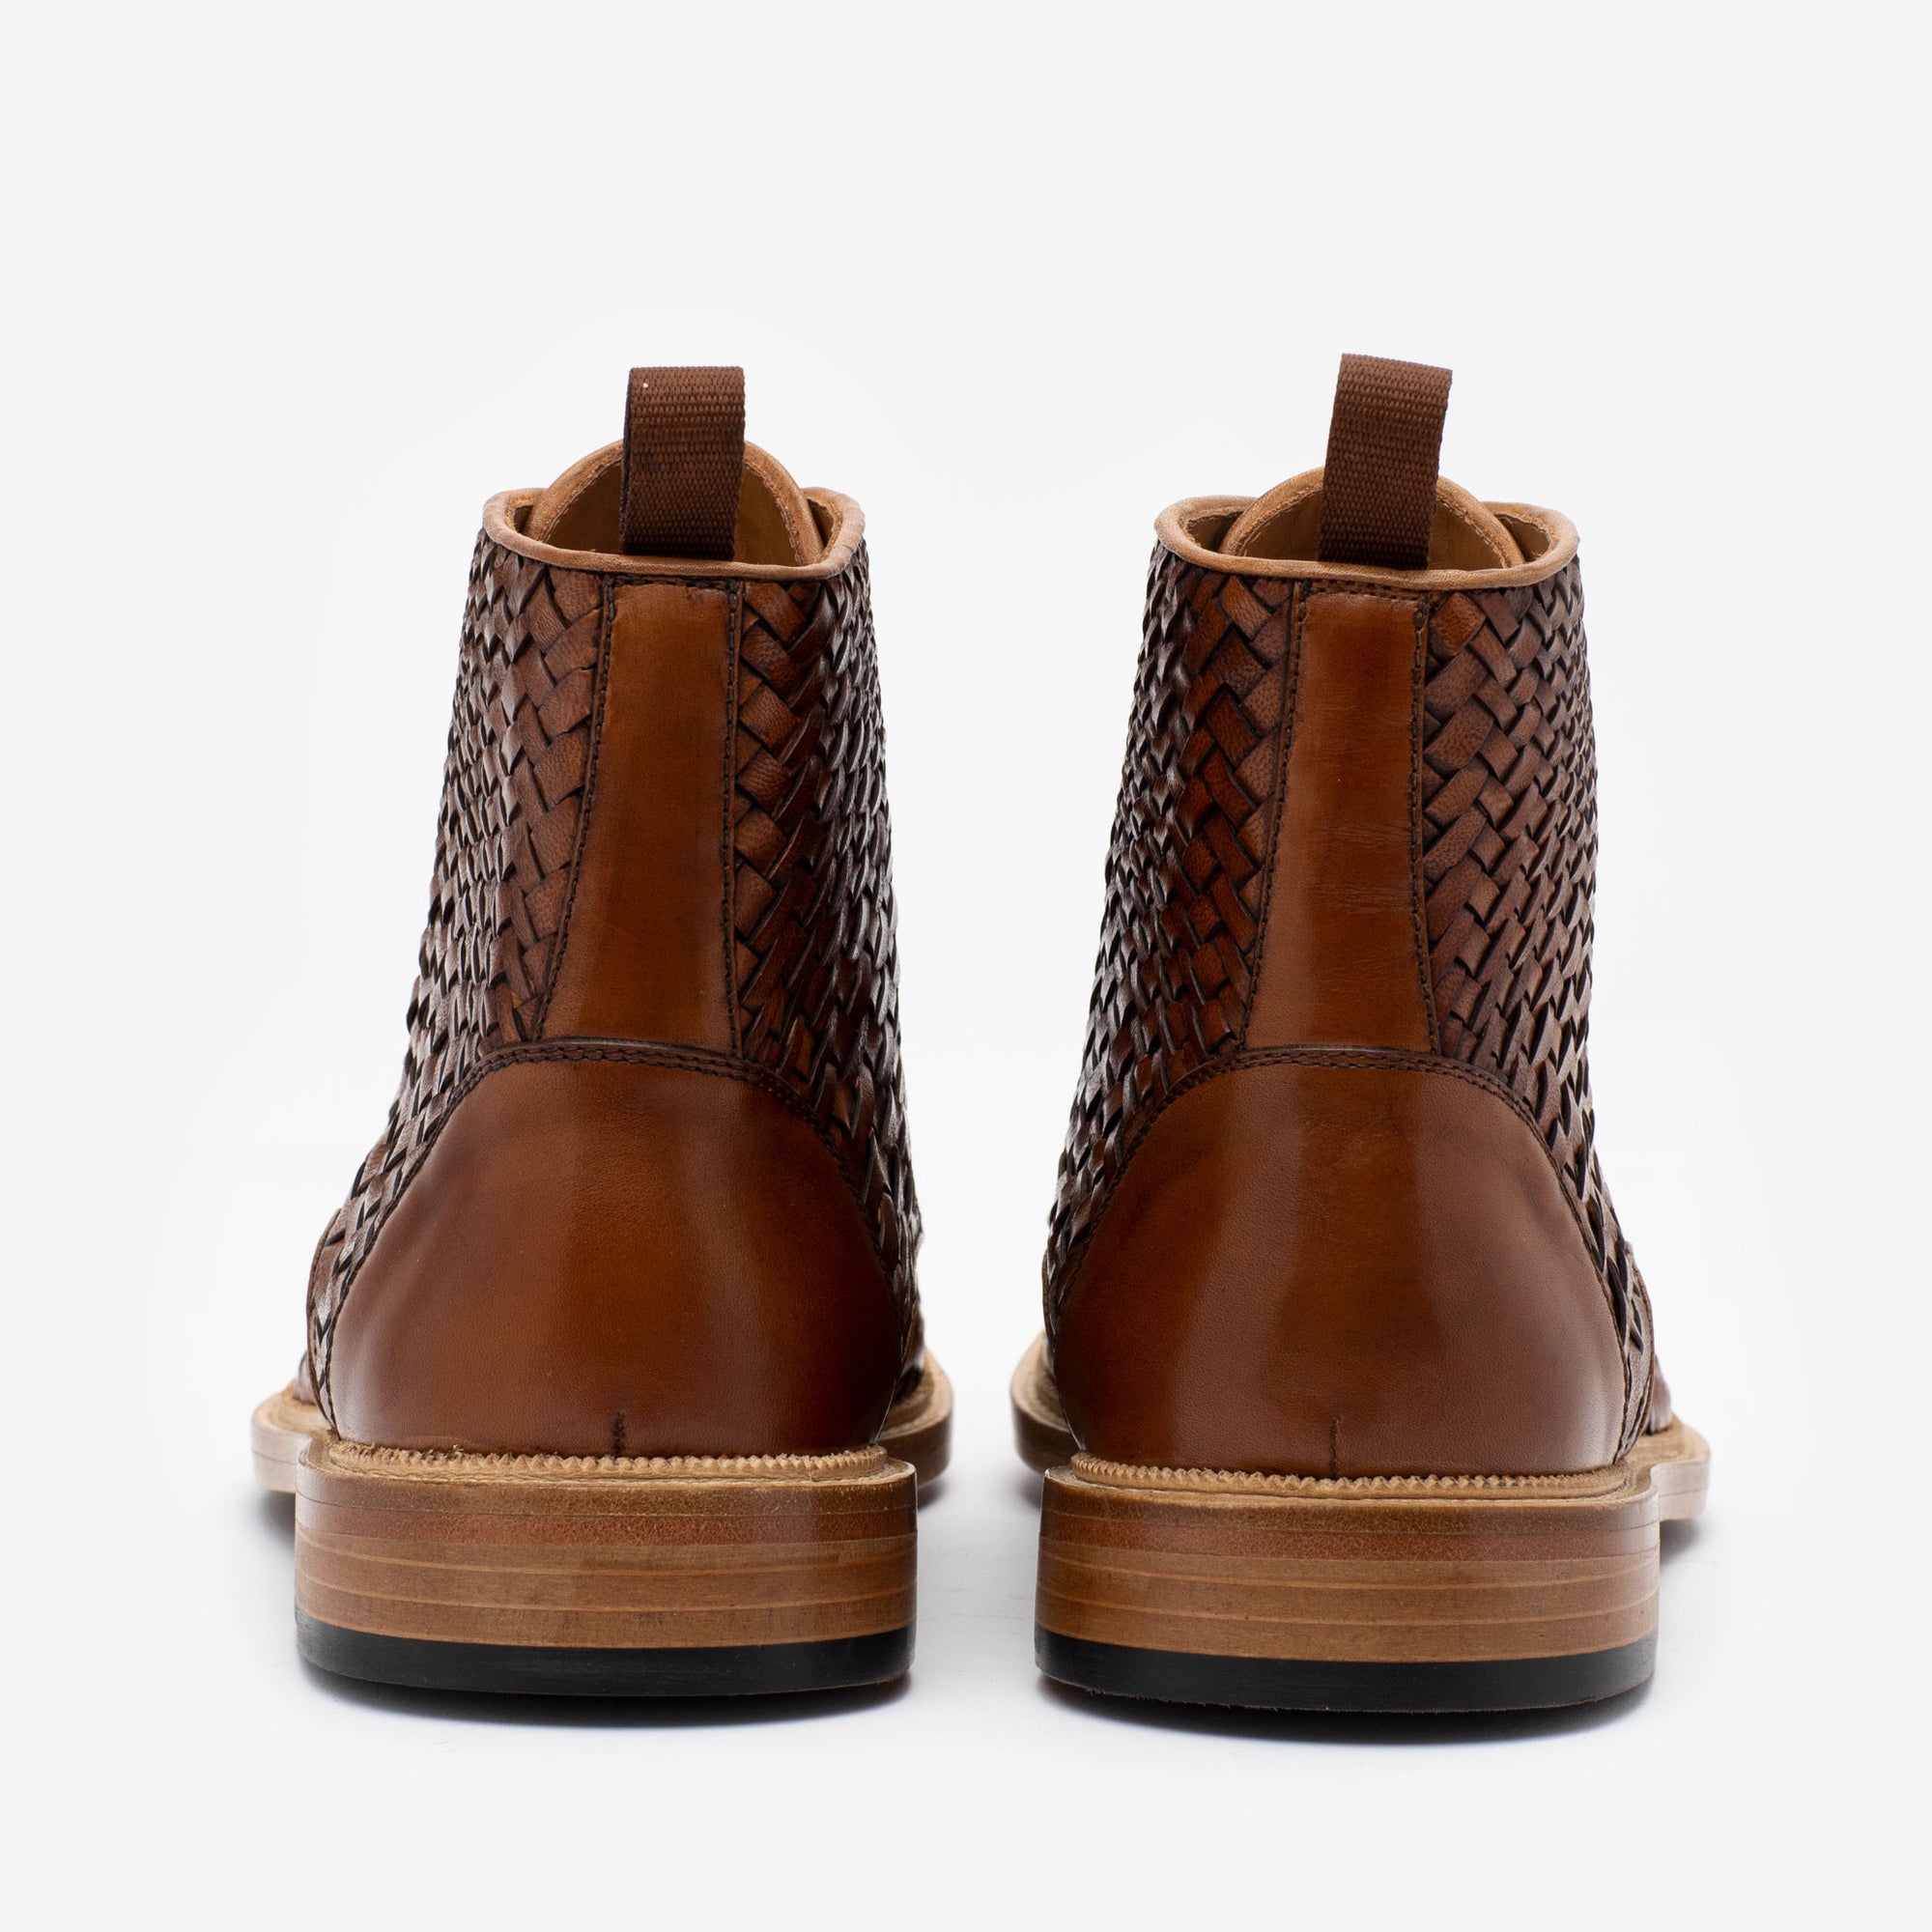 The Rome Boot in Woven Heel